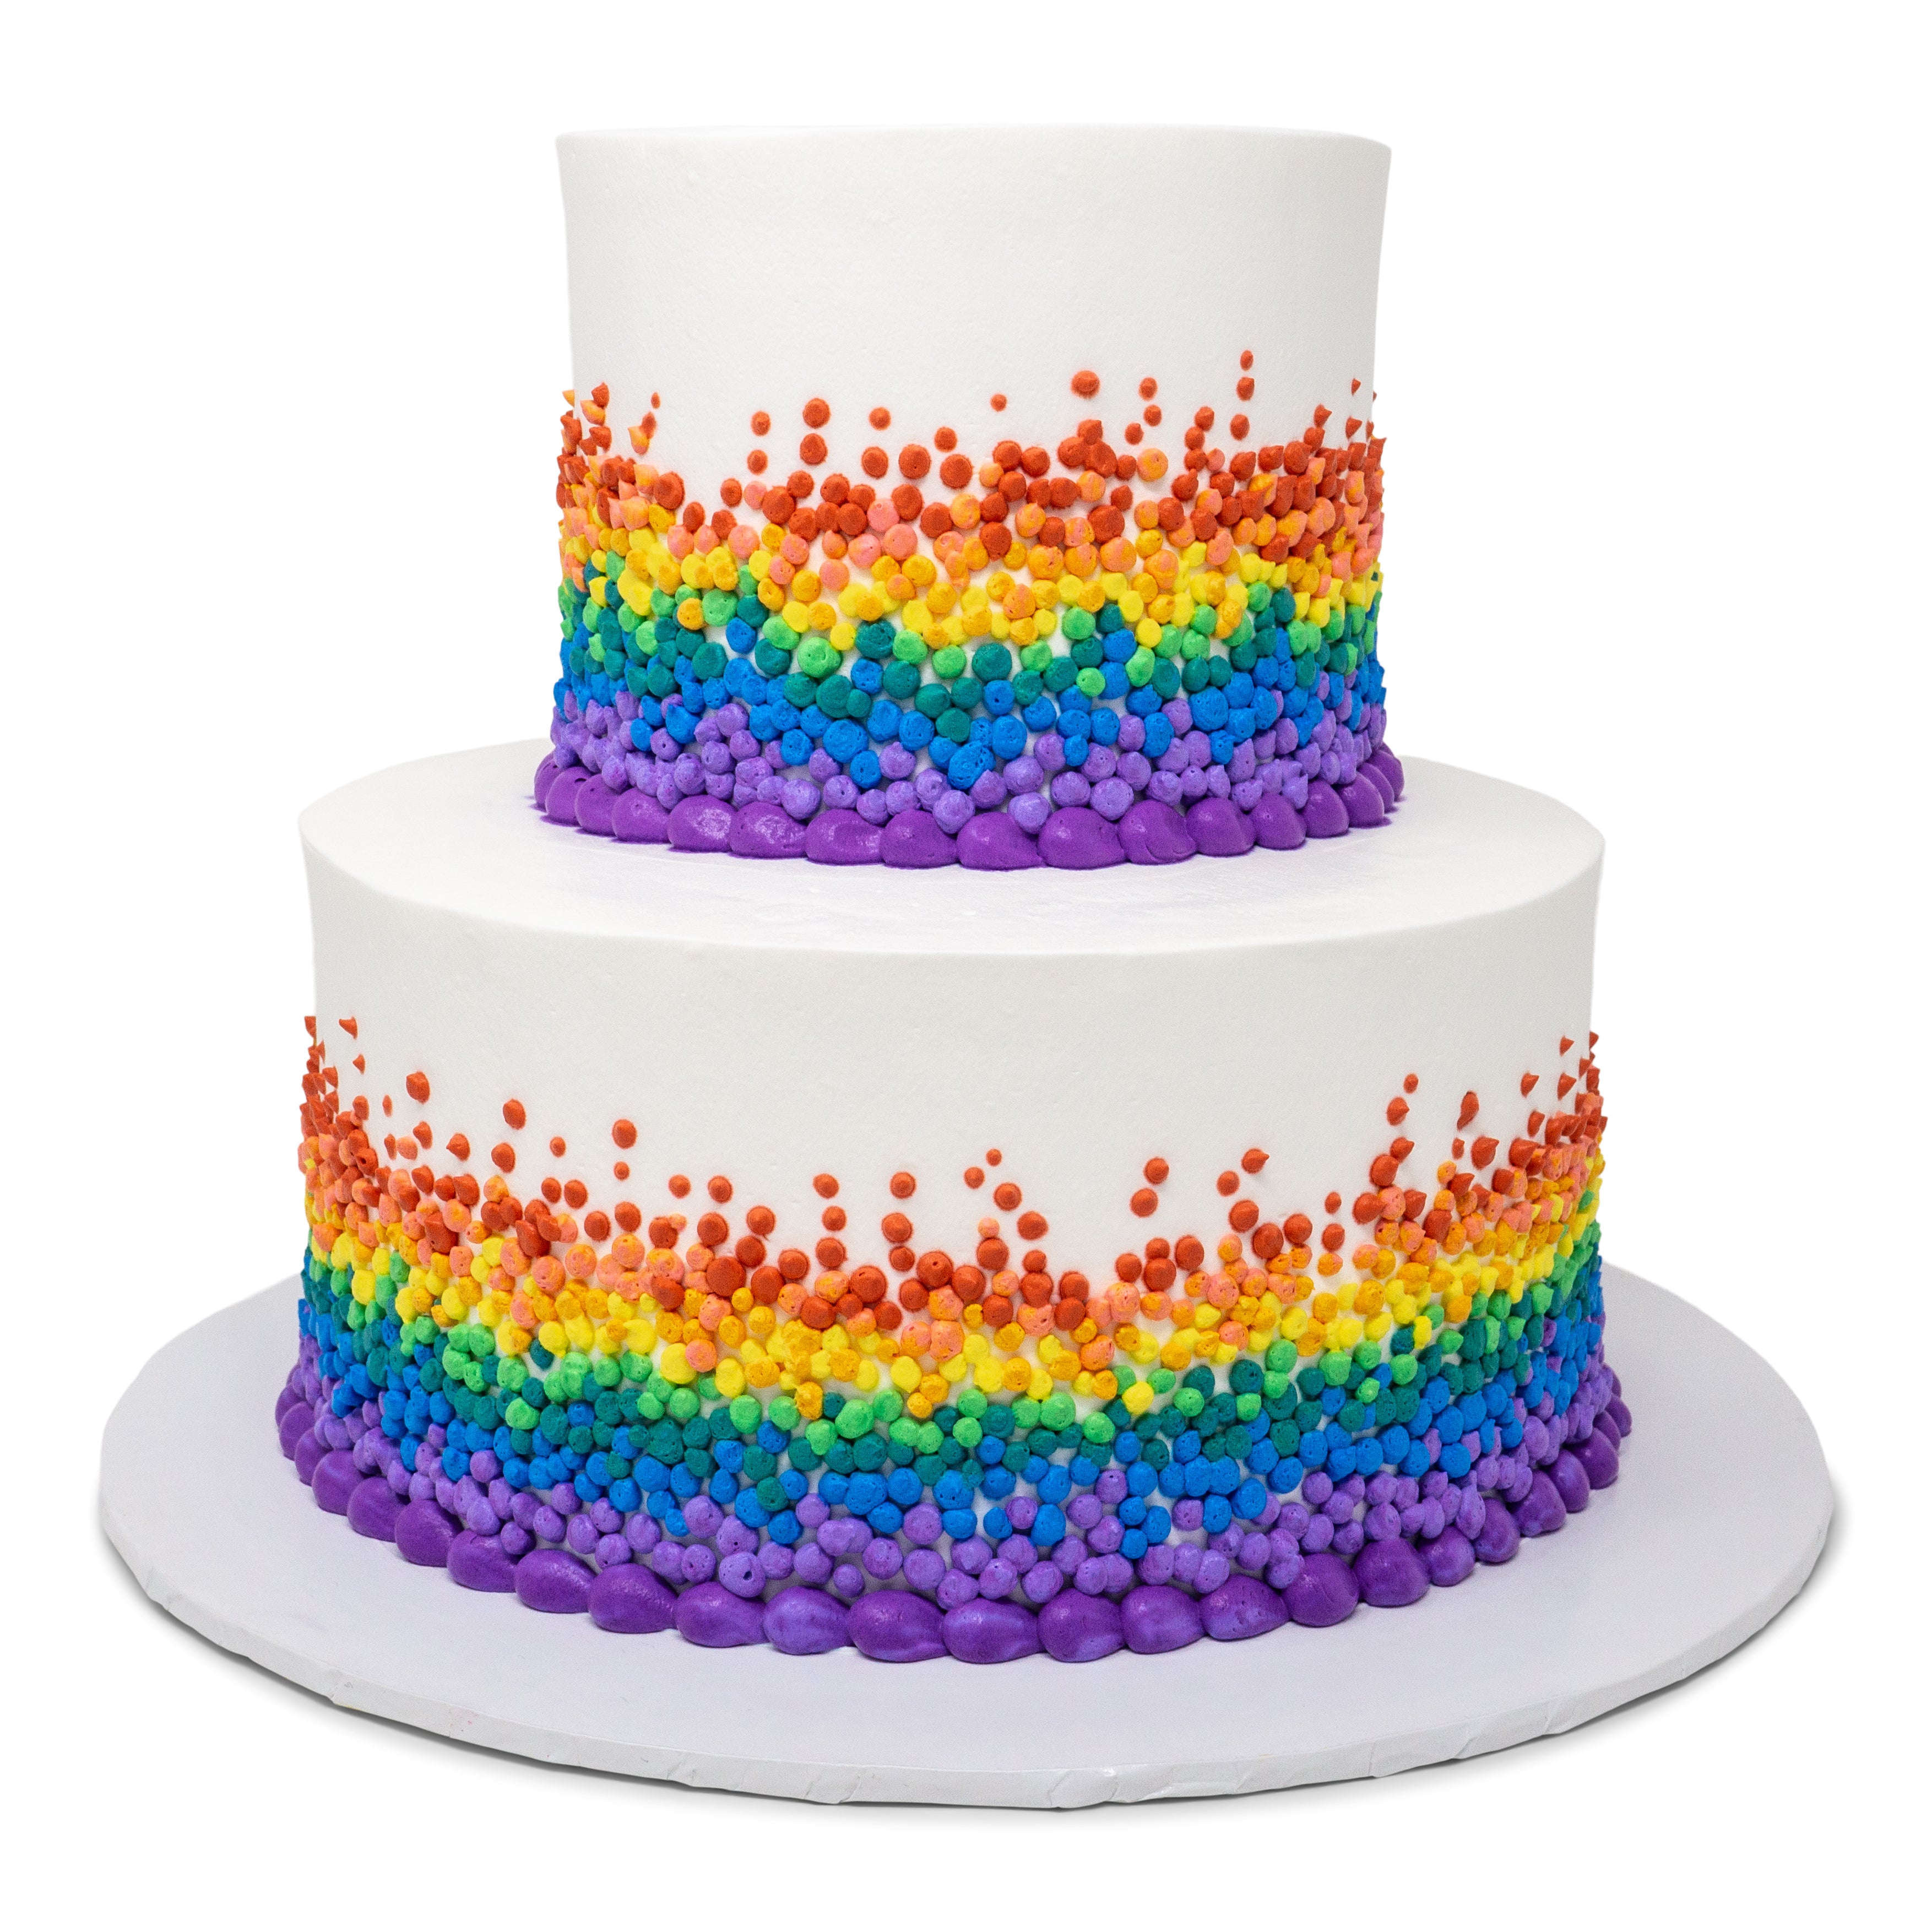 28 Two-Tier Wedding Cakes for Any Occasion